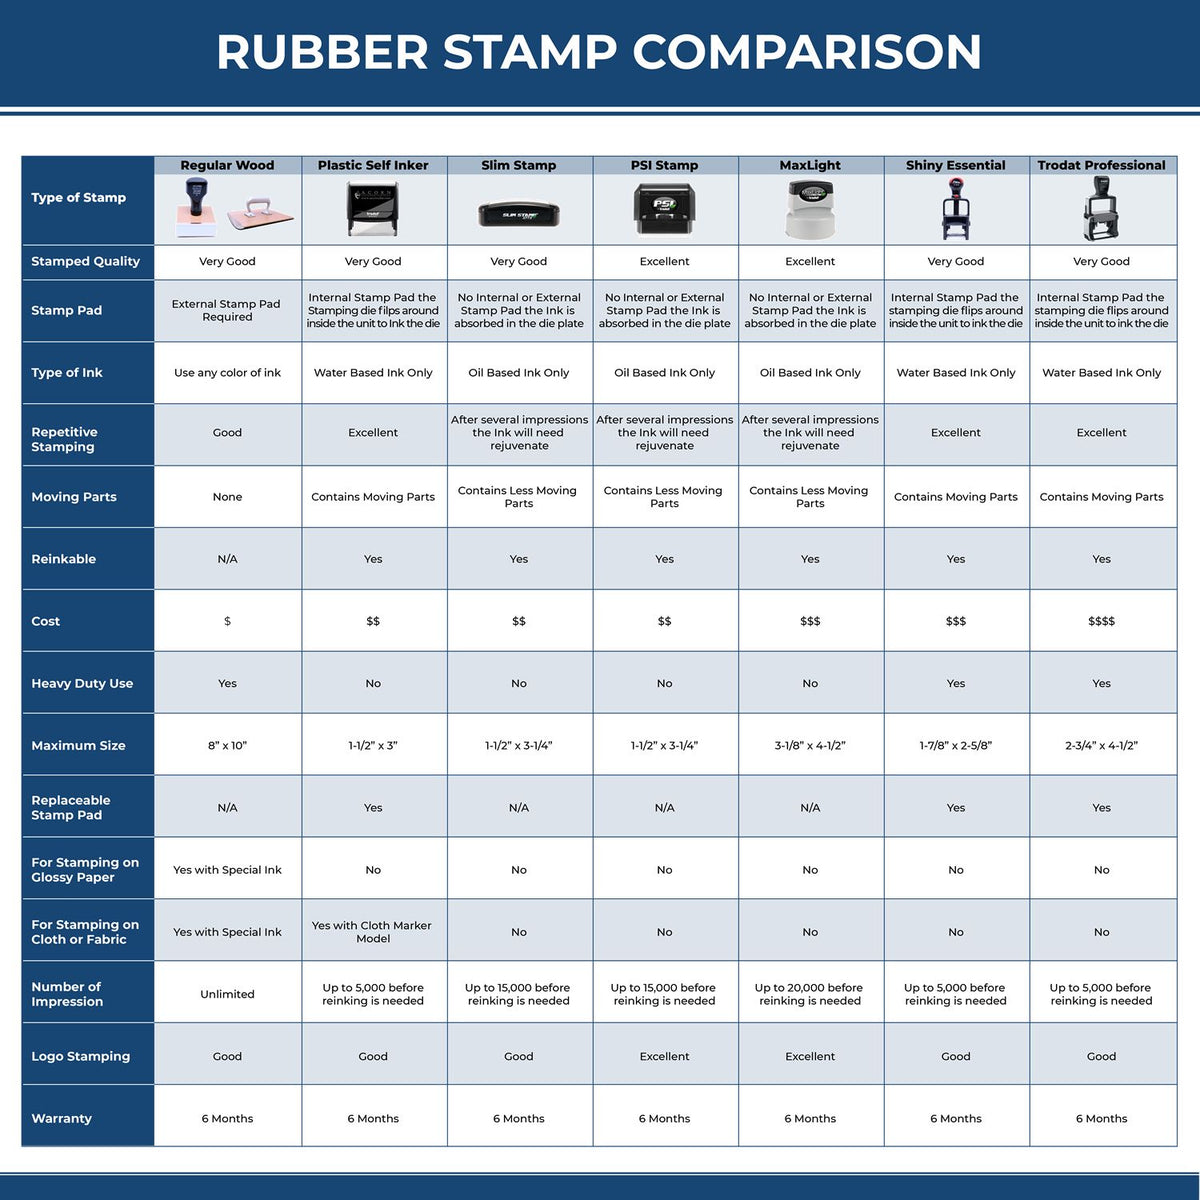 A comparison chart for the different types of mount models available for the Self-Inking Georgia PE Stamp.